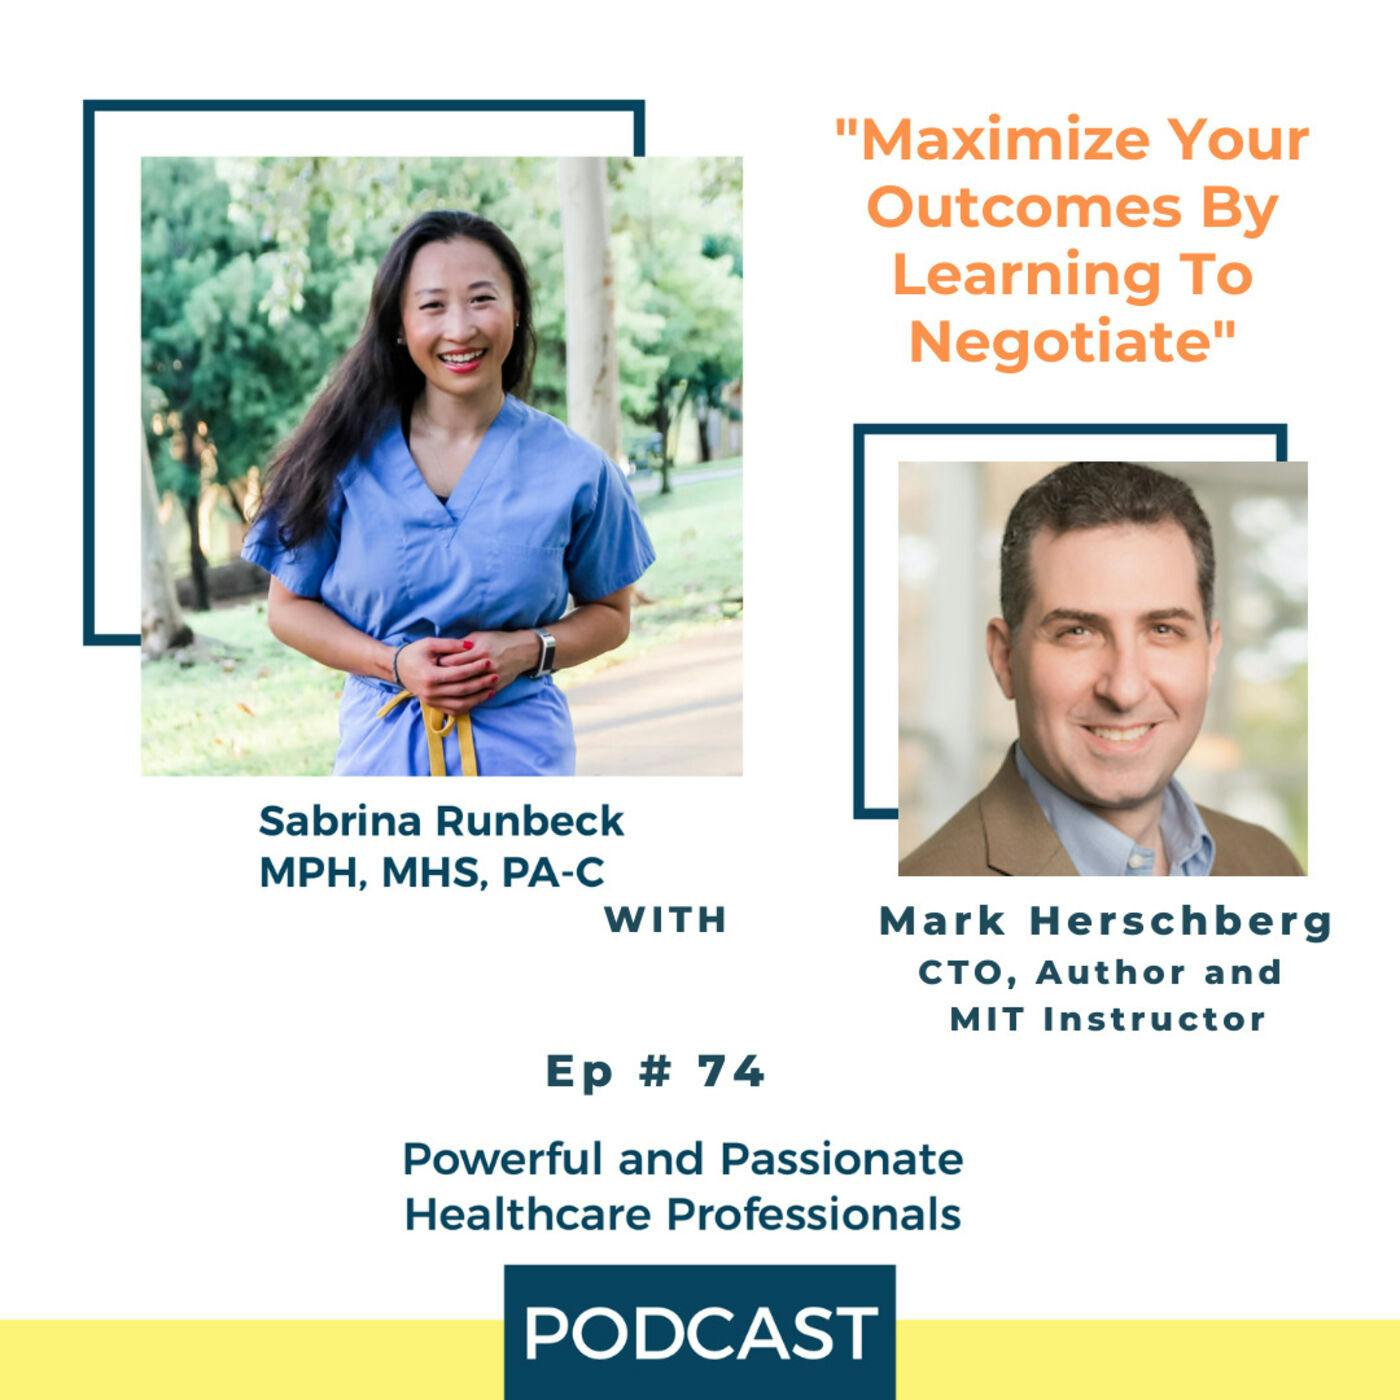 Ep 74 – Maximize Your Outcomes By Learning To Negotiate with Mark  Herschberg